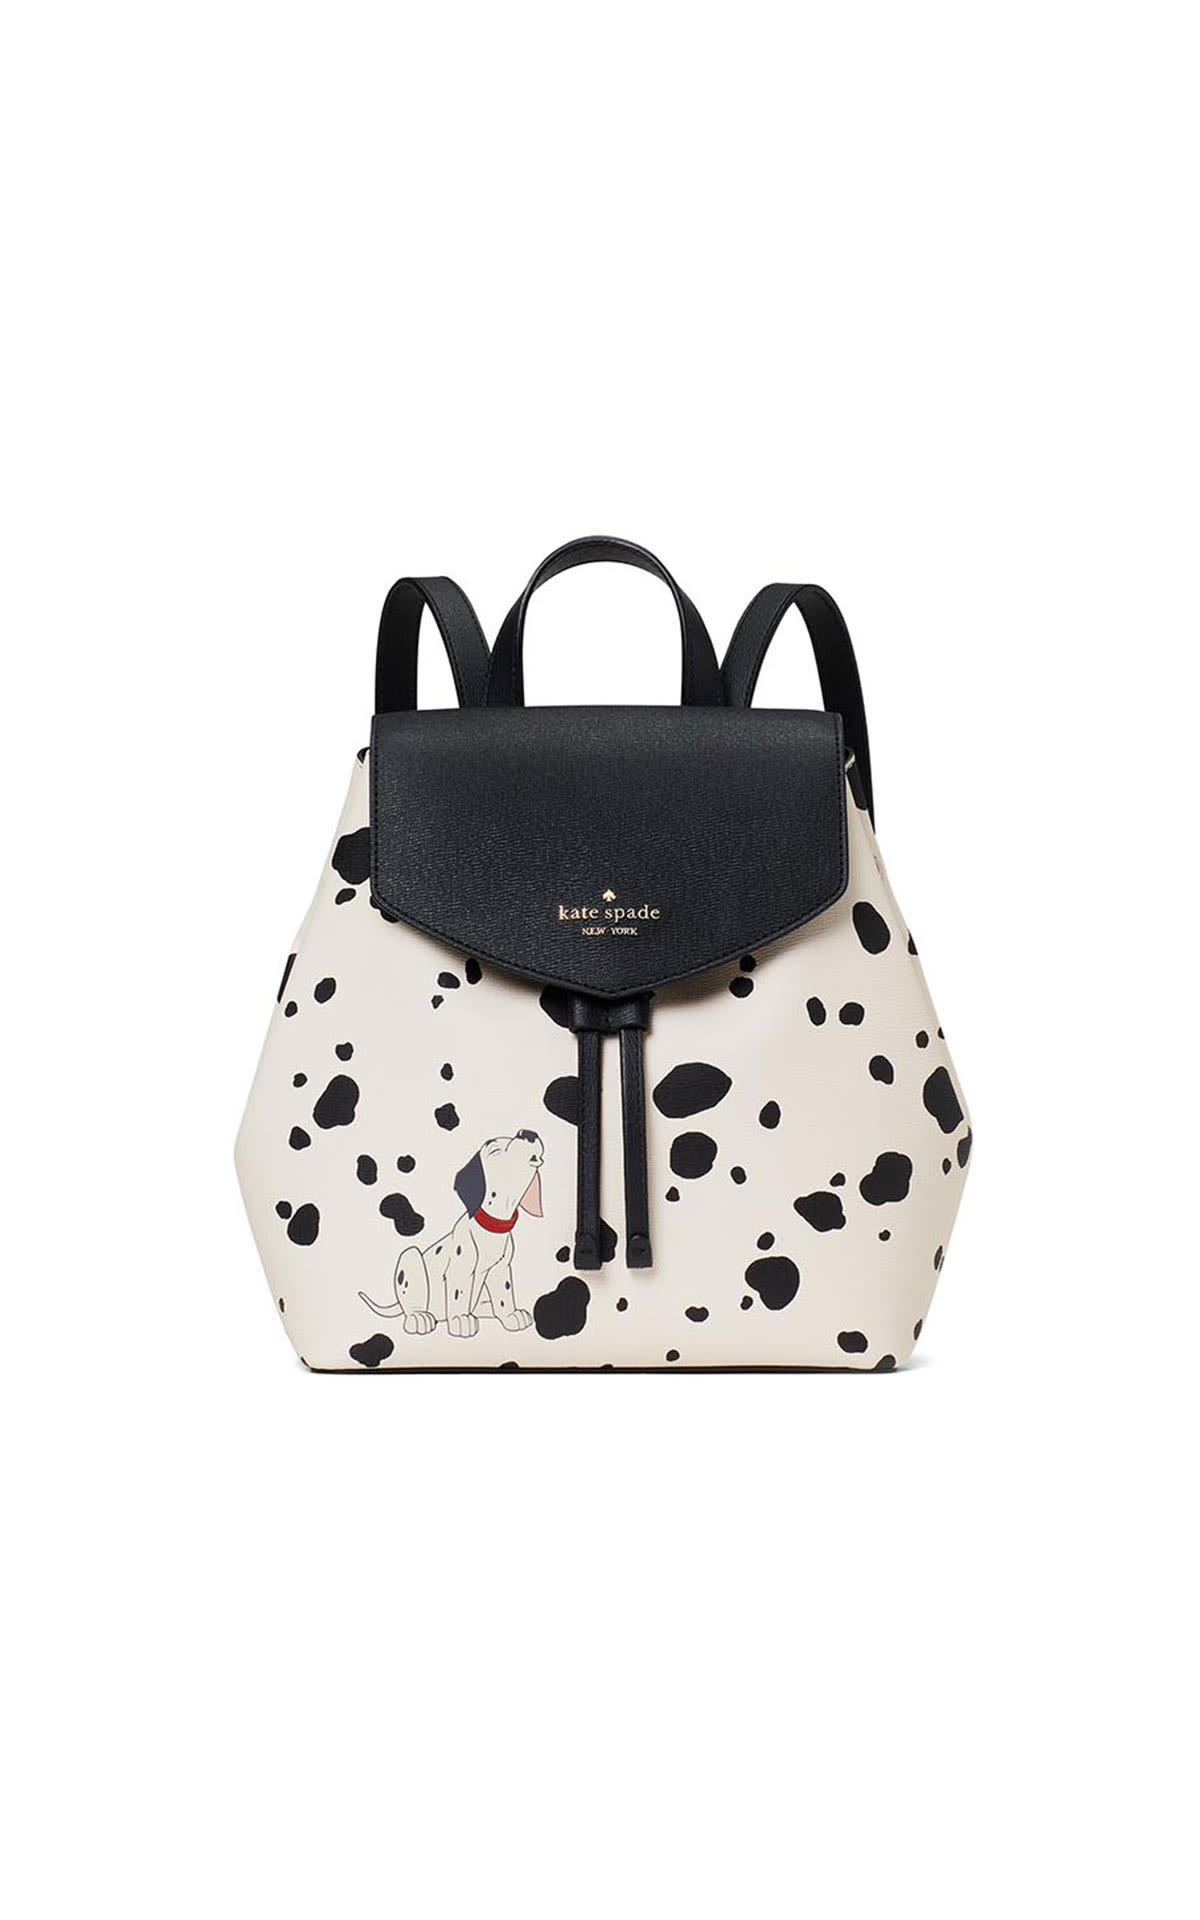 Kate Spade Disney x Kate Spade New York 101 Dalmatians flap backpack from Bicester Village